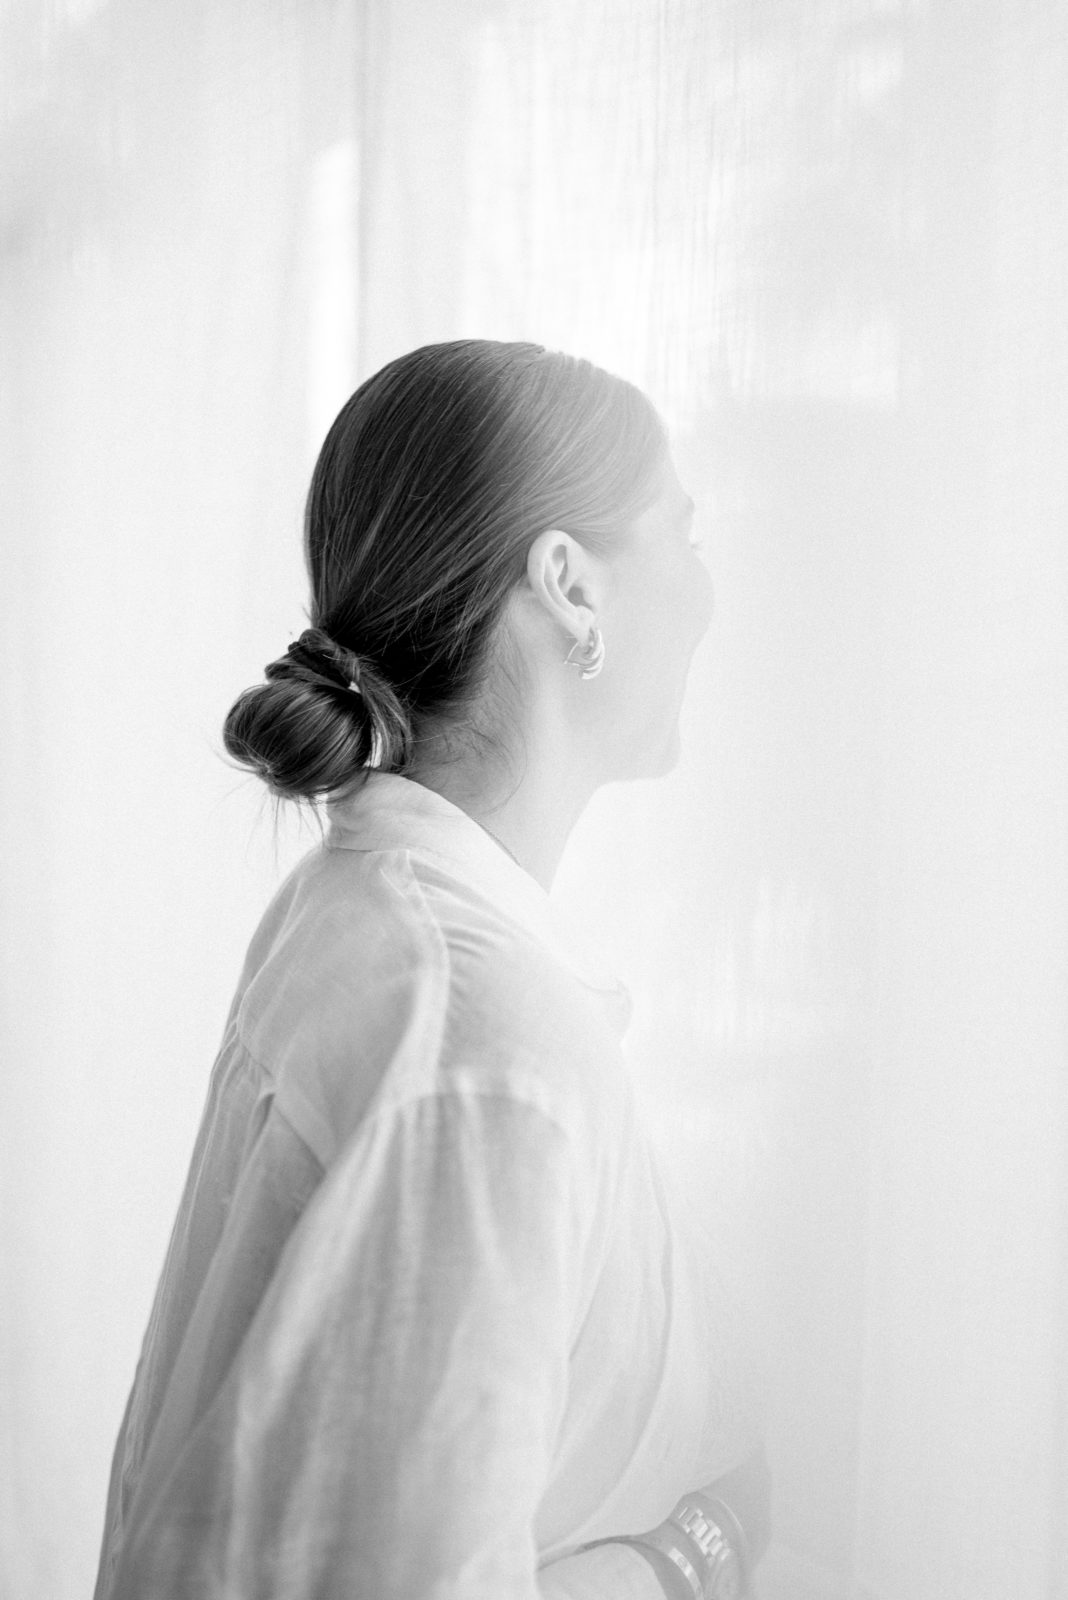 Elegant and timeless black and white photo of a woman looking through the window